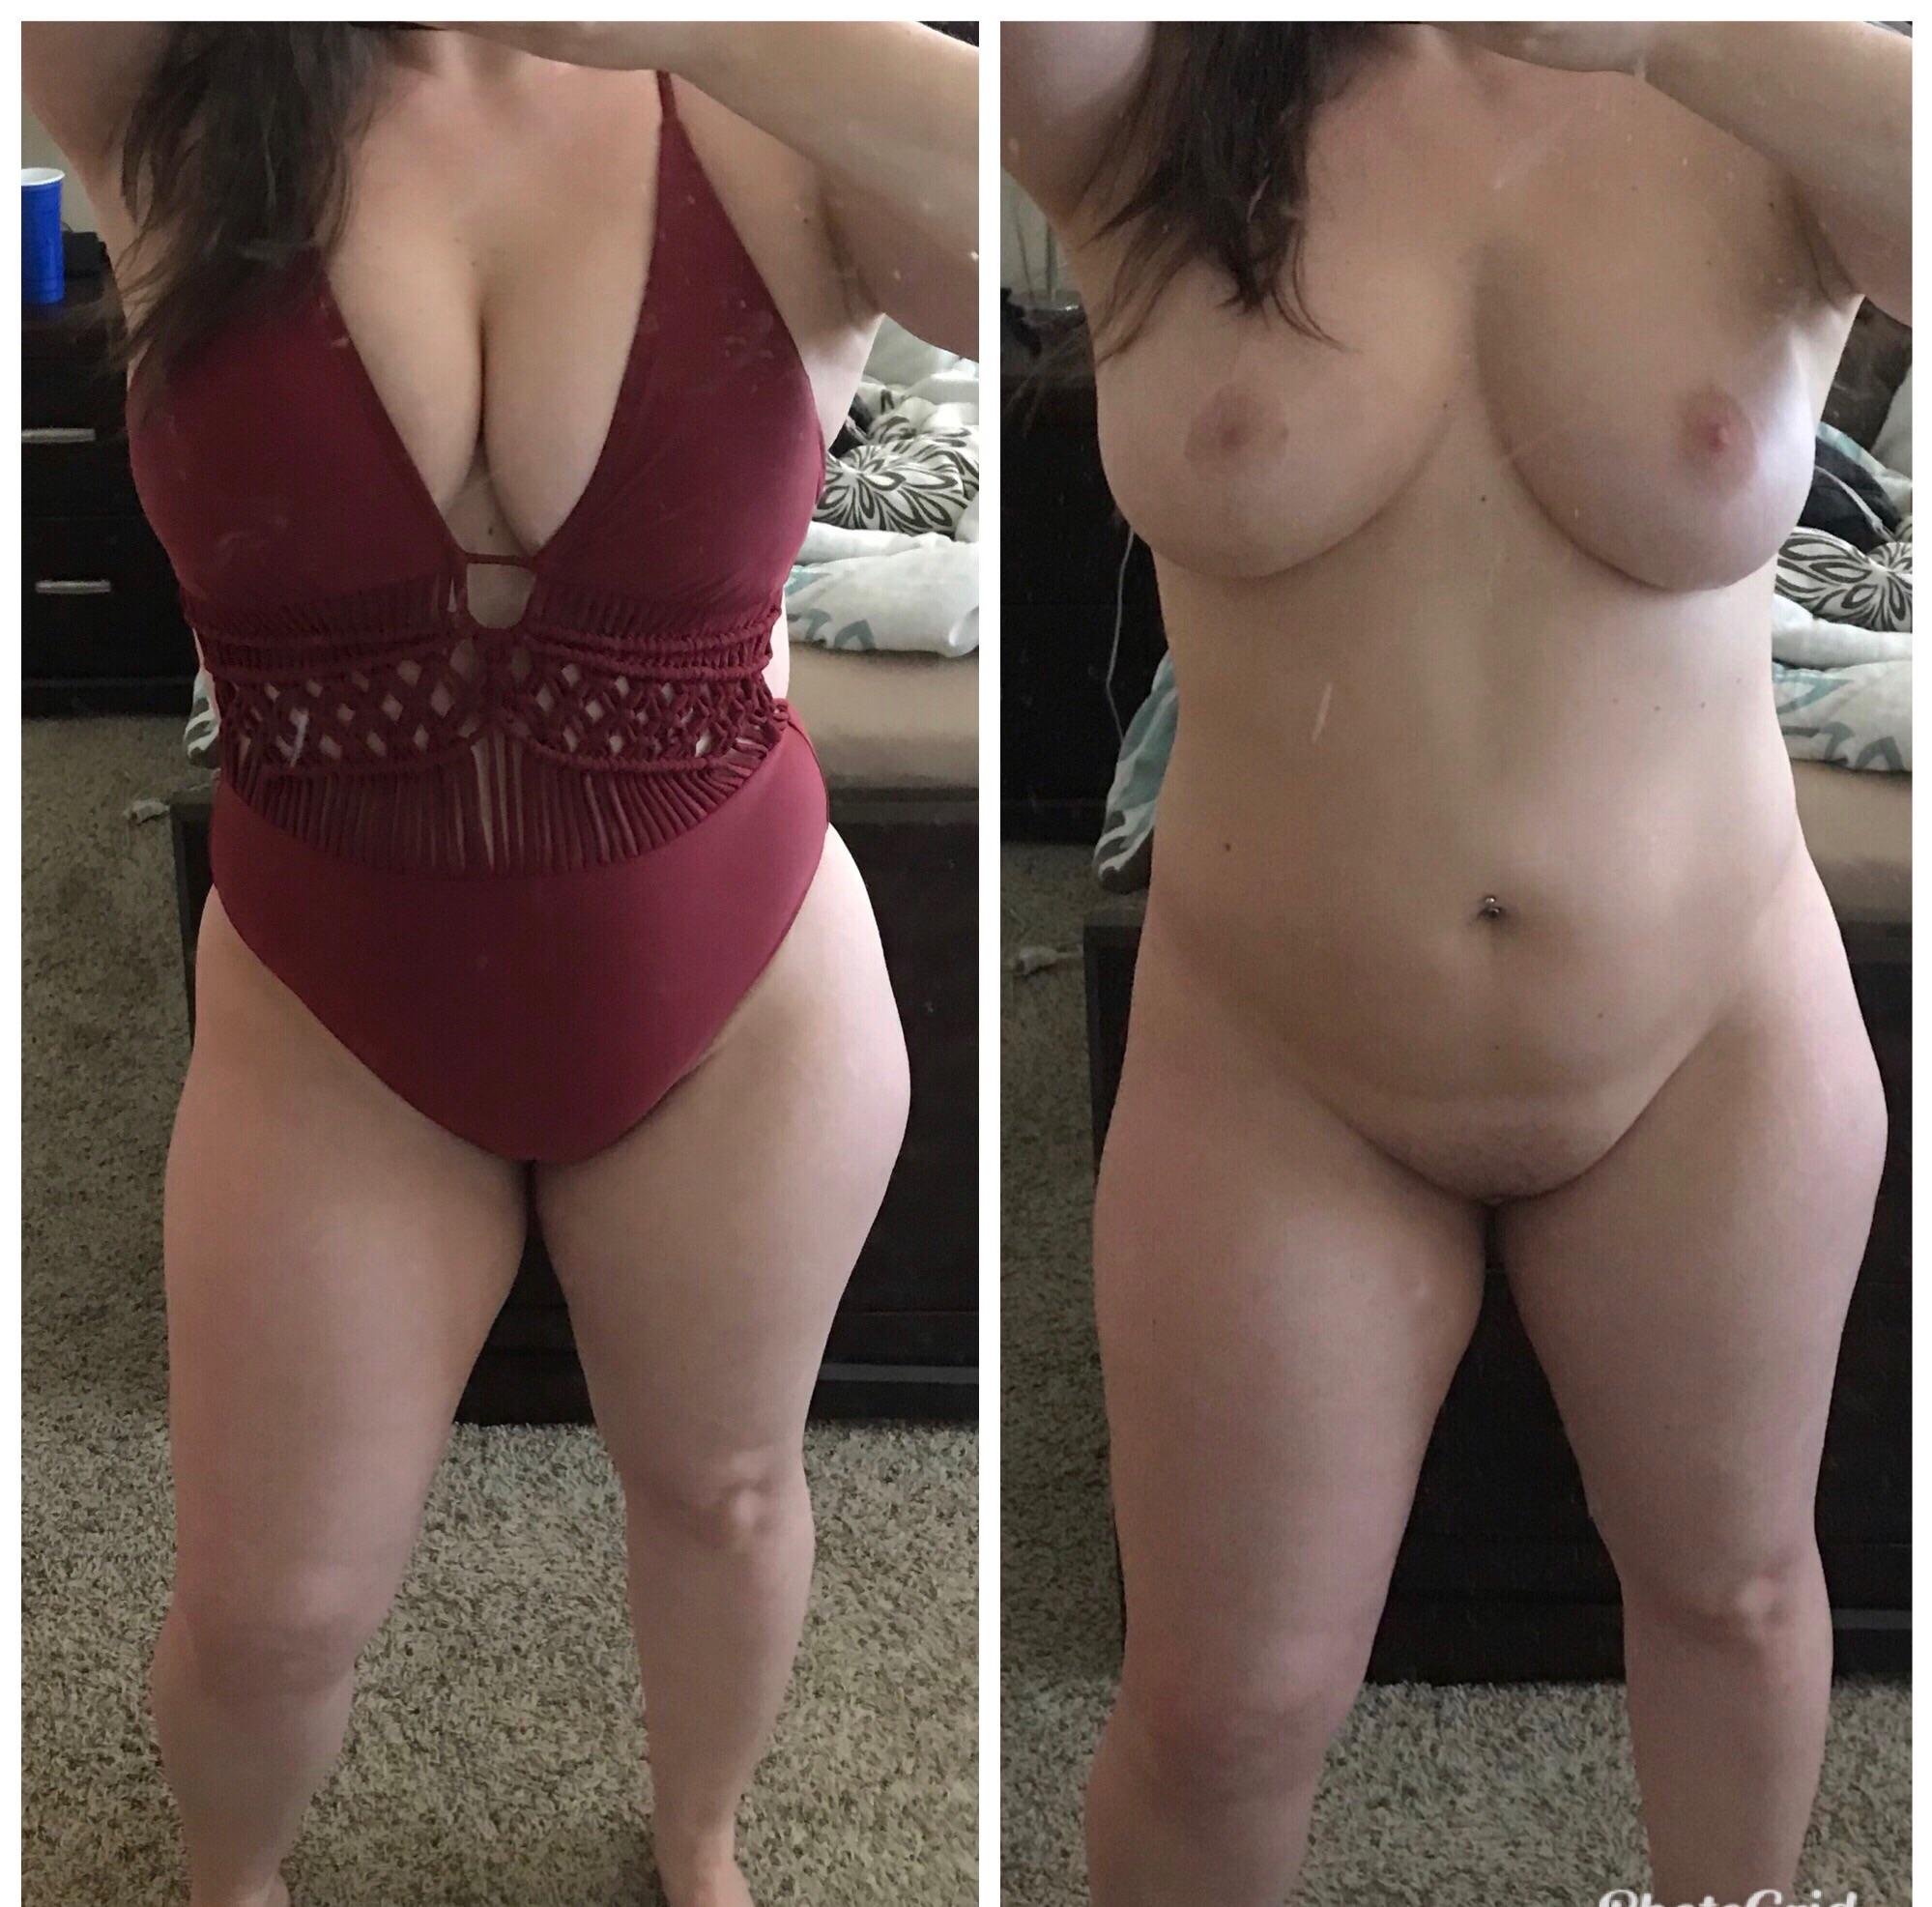 On/Off: Swimsuit Edition